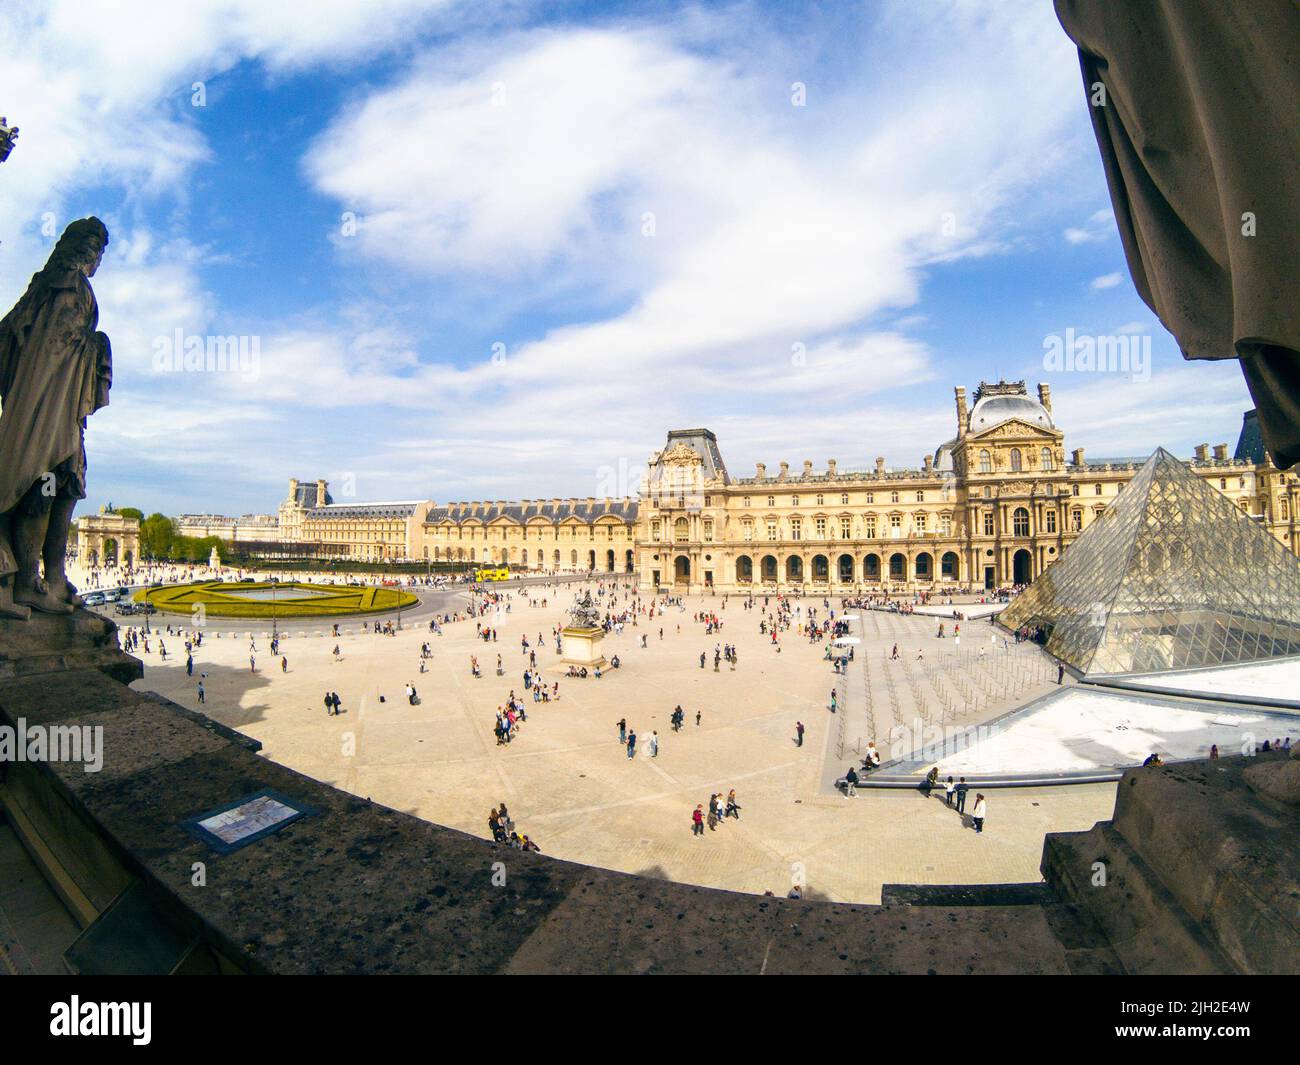 PARIS, FRANCE -APRIL 8, 2018:  The Louvre or the Louvre Museum is the world's largest art museum and a historic monument in Paris, France. Stock Photo